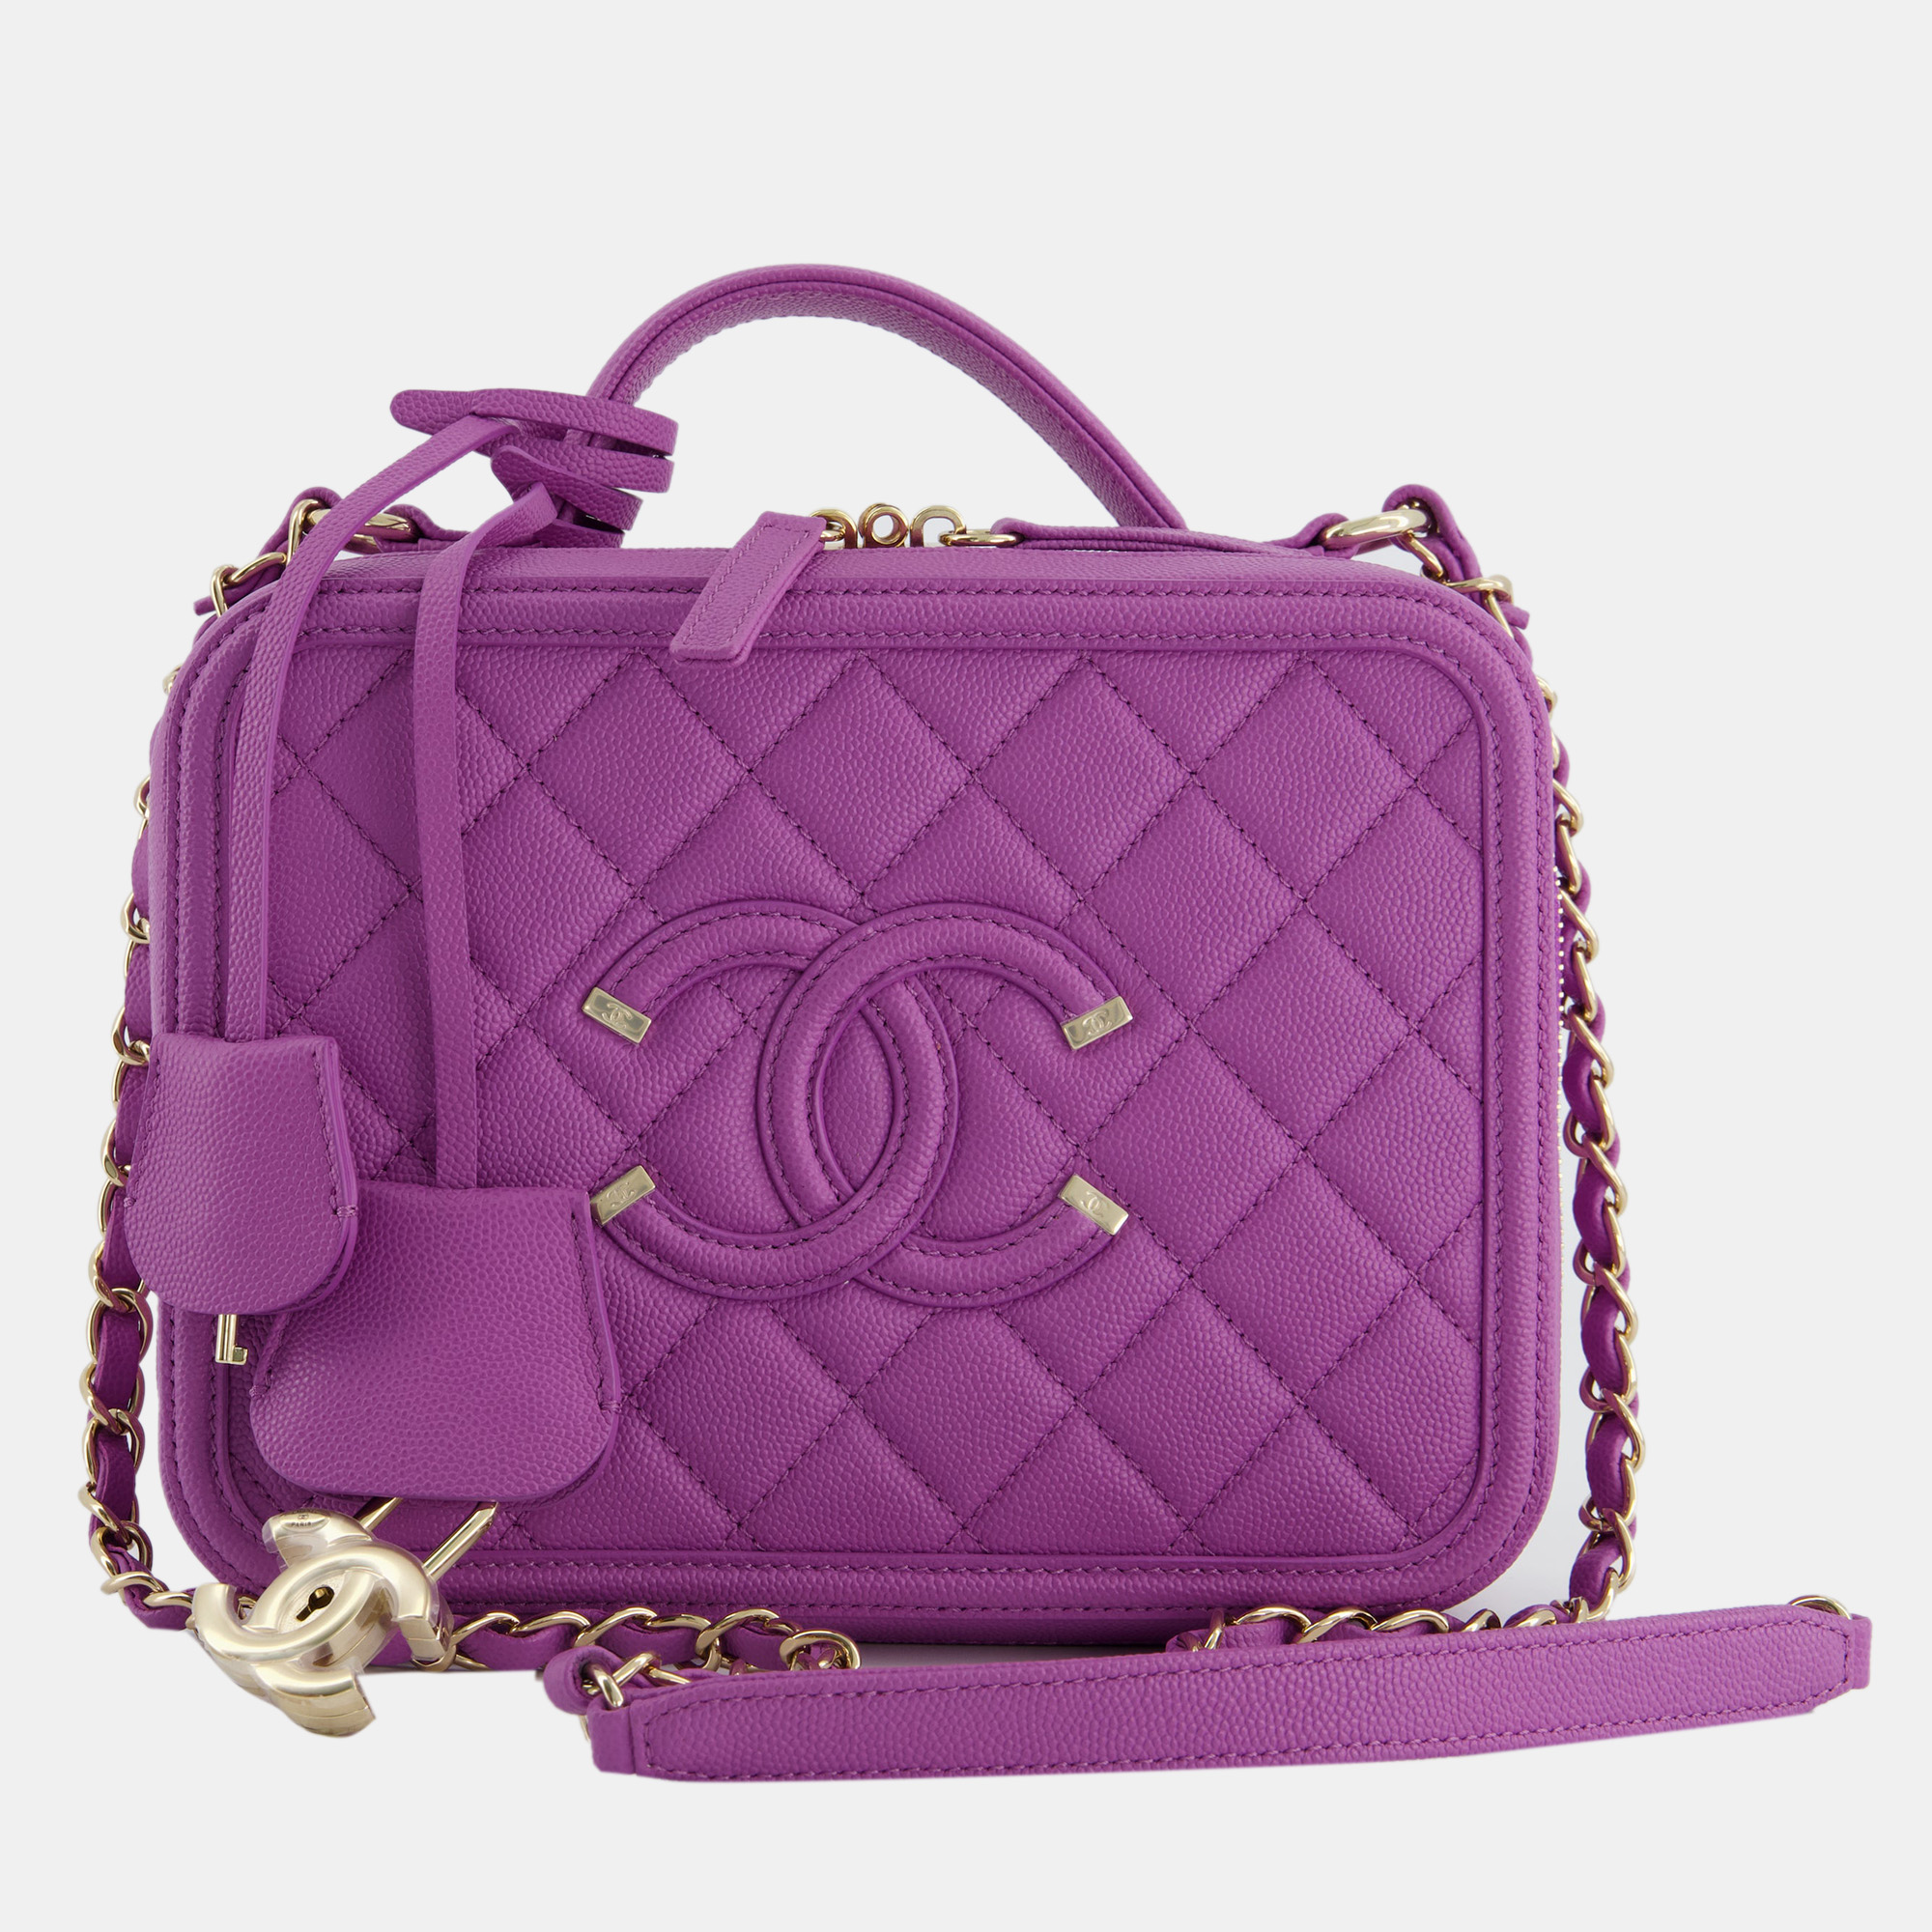 Chanel Purple CC Vanity Case Bag In Caviar Leather With Champagne Gold Hardware